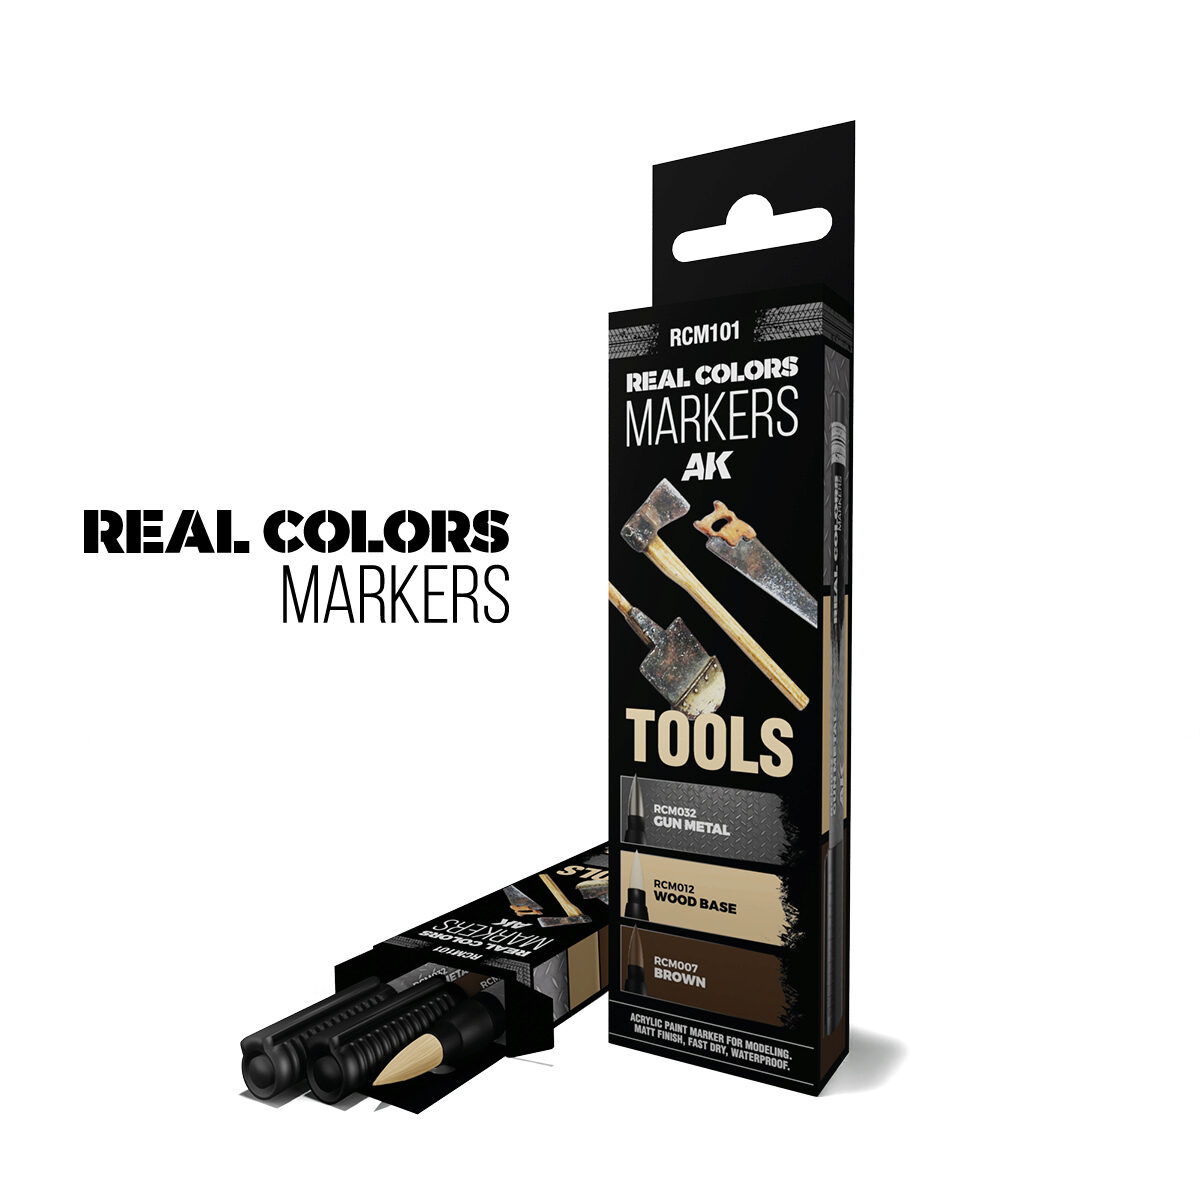 AK RCM101 TOOLS - SET 3 REAL COLORS MARKERS